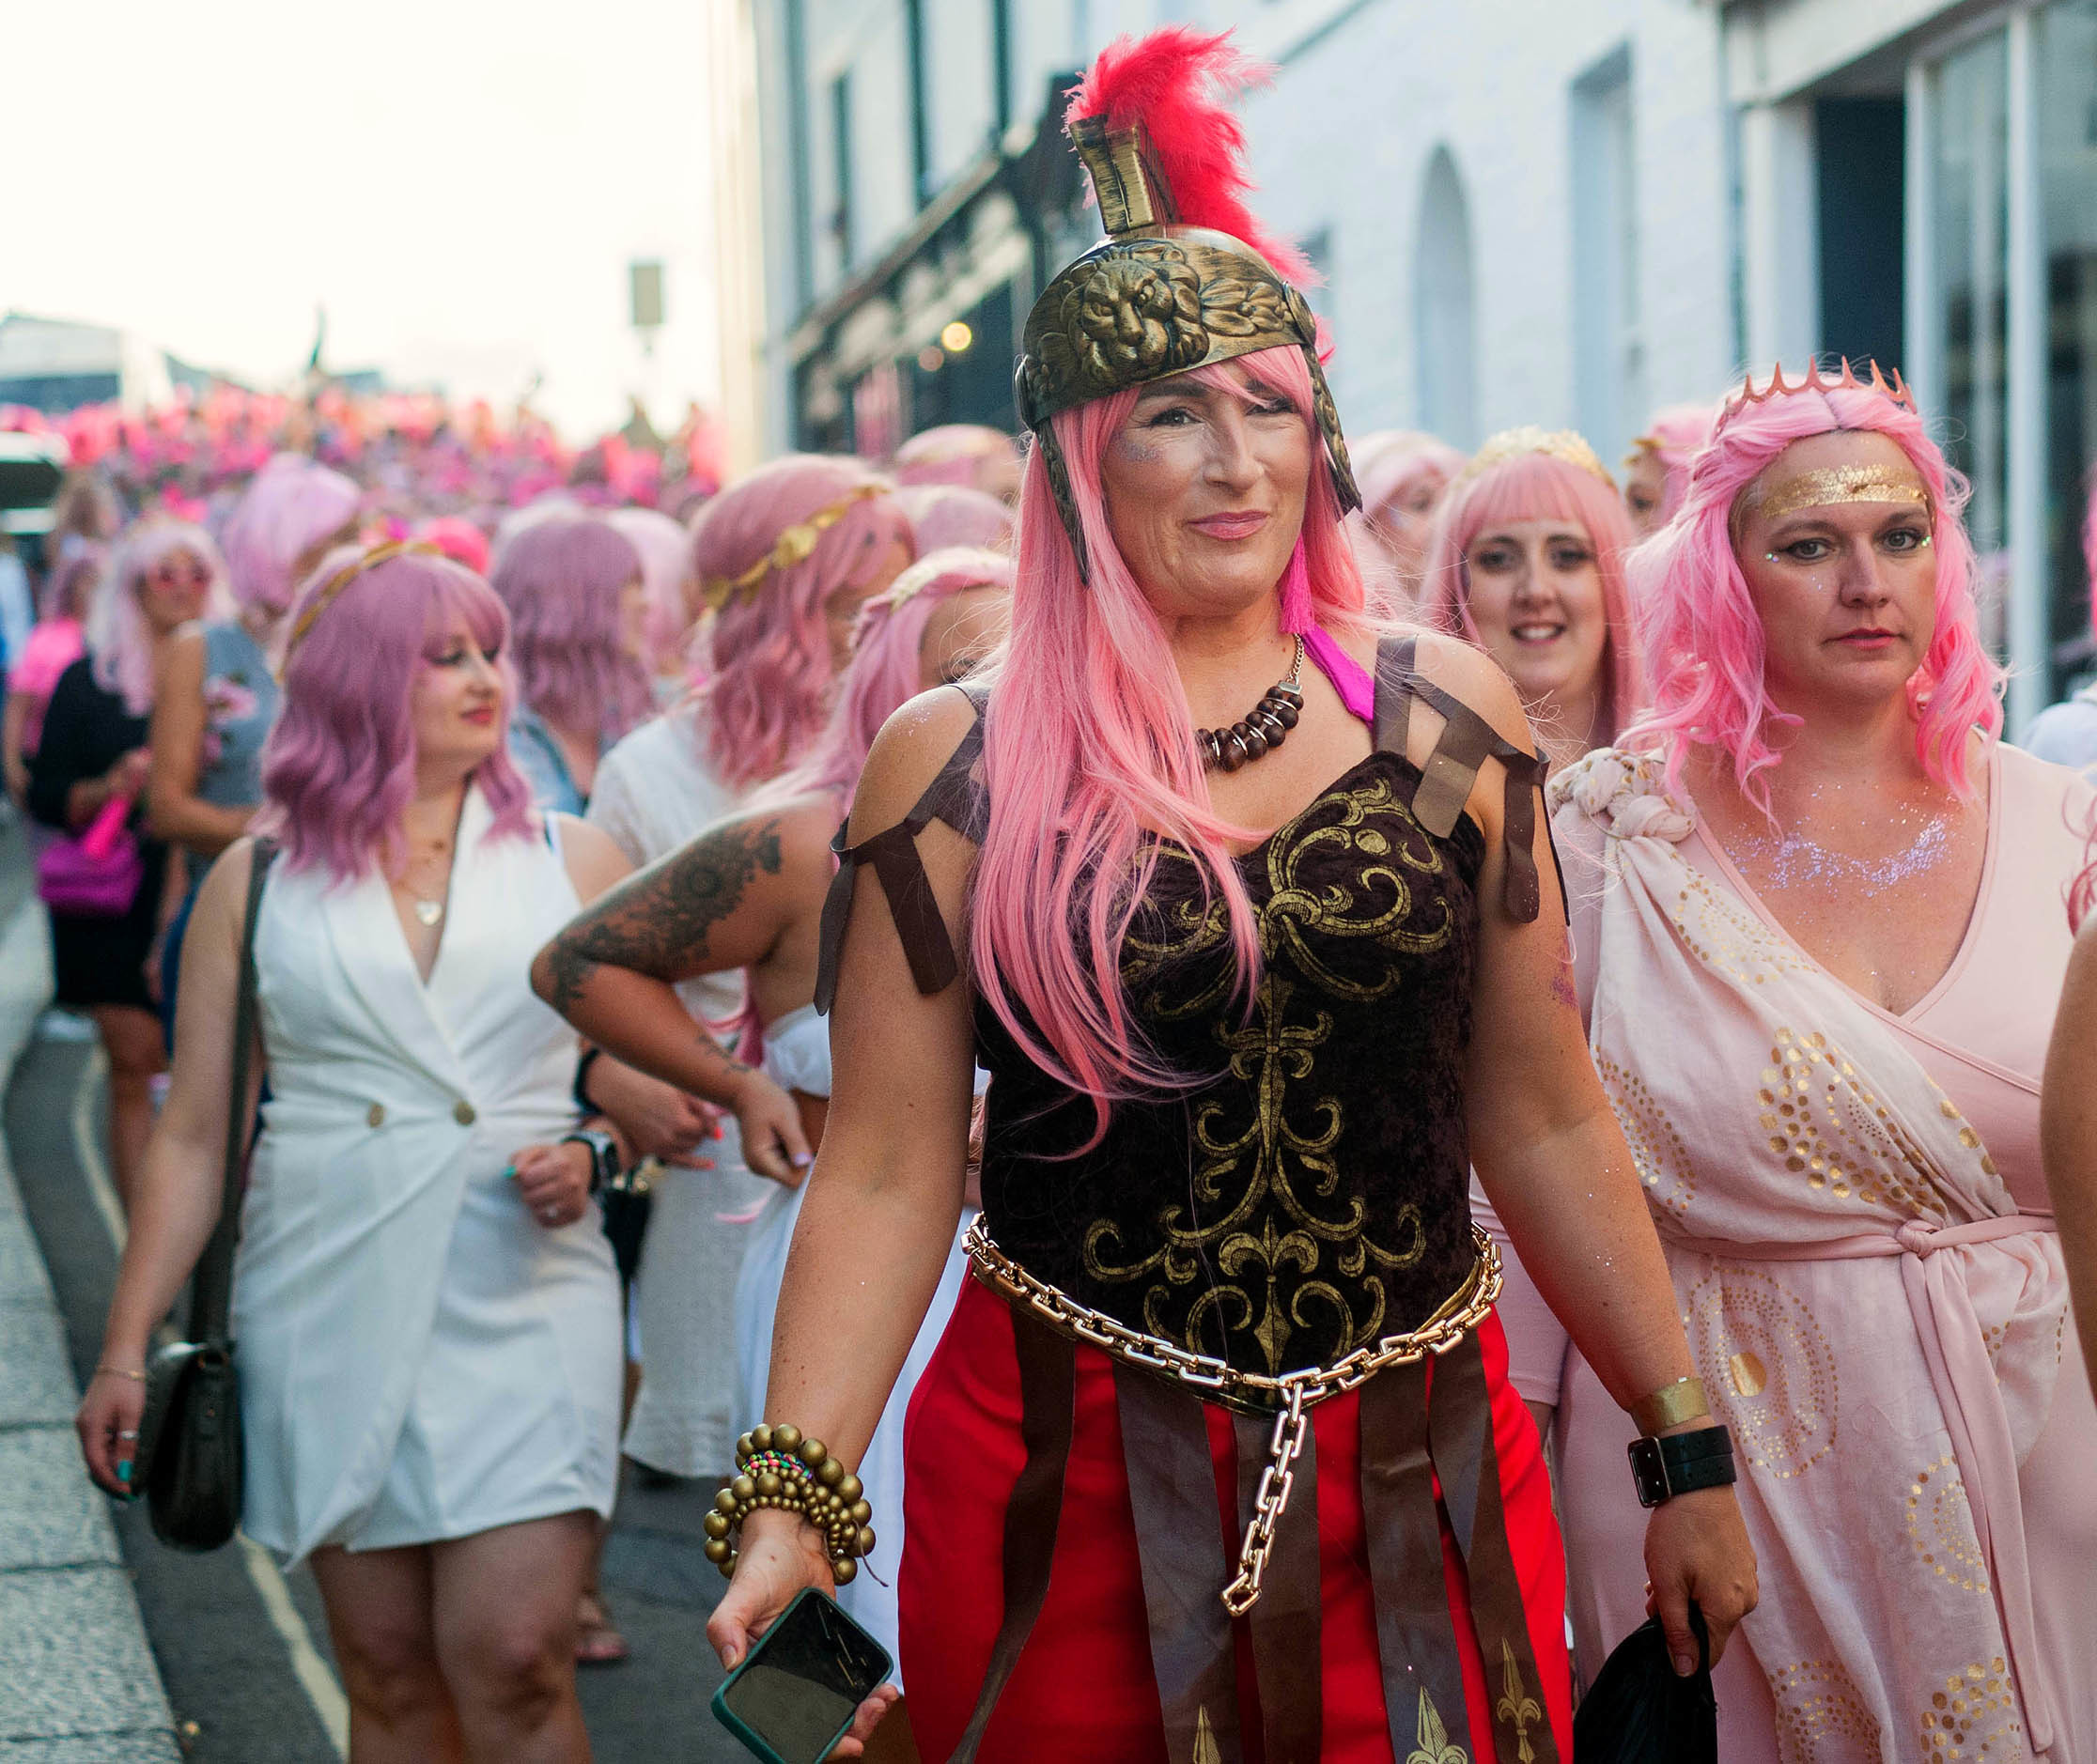 Falmouth Pink Wig Parade from the Greenbank Hotel to Church Street car park on Friday evening: Picture by Colin Higgs